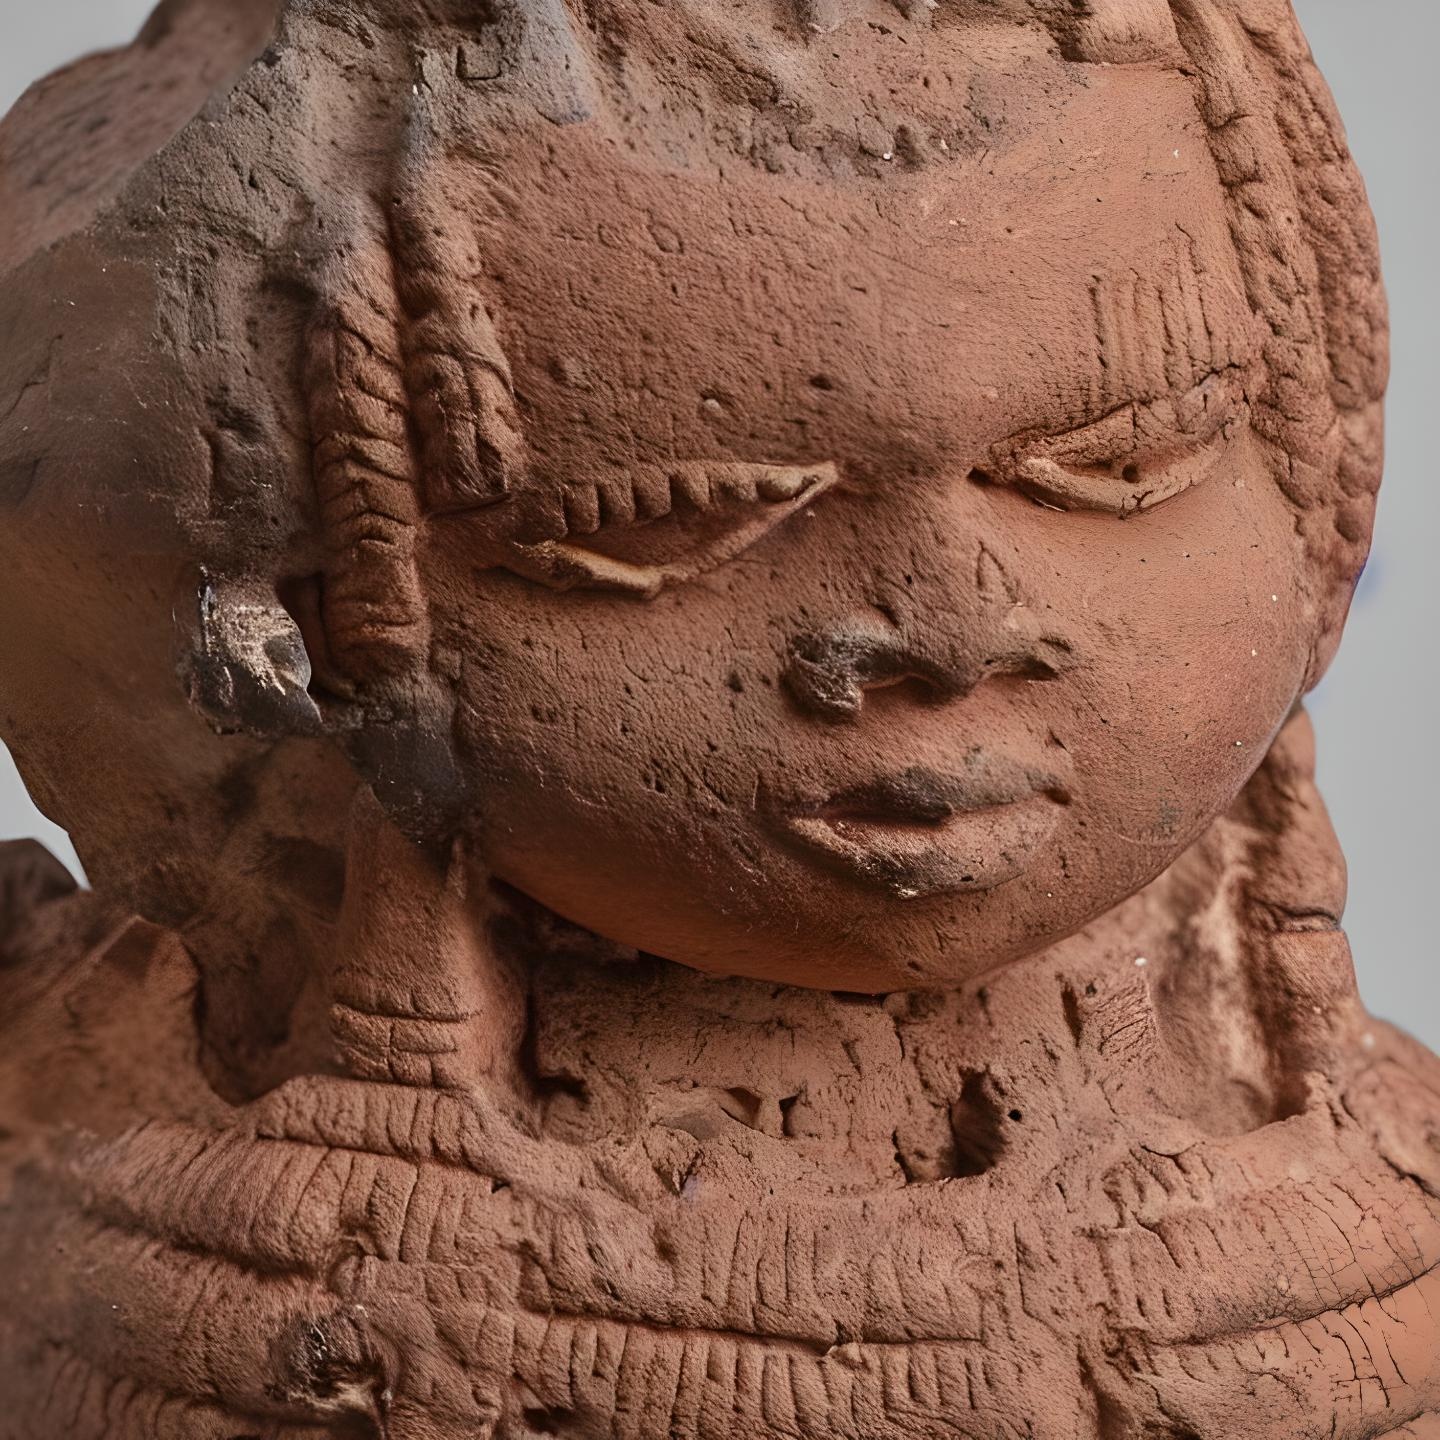 An AI-generated close up view of a sculpture showing a human face in what appears to be a terracotta material. The sculpture appears to be weathered a grayish brown color in patches.